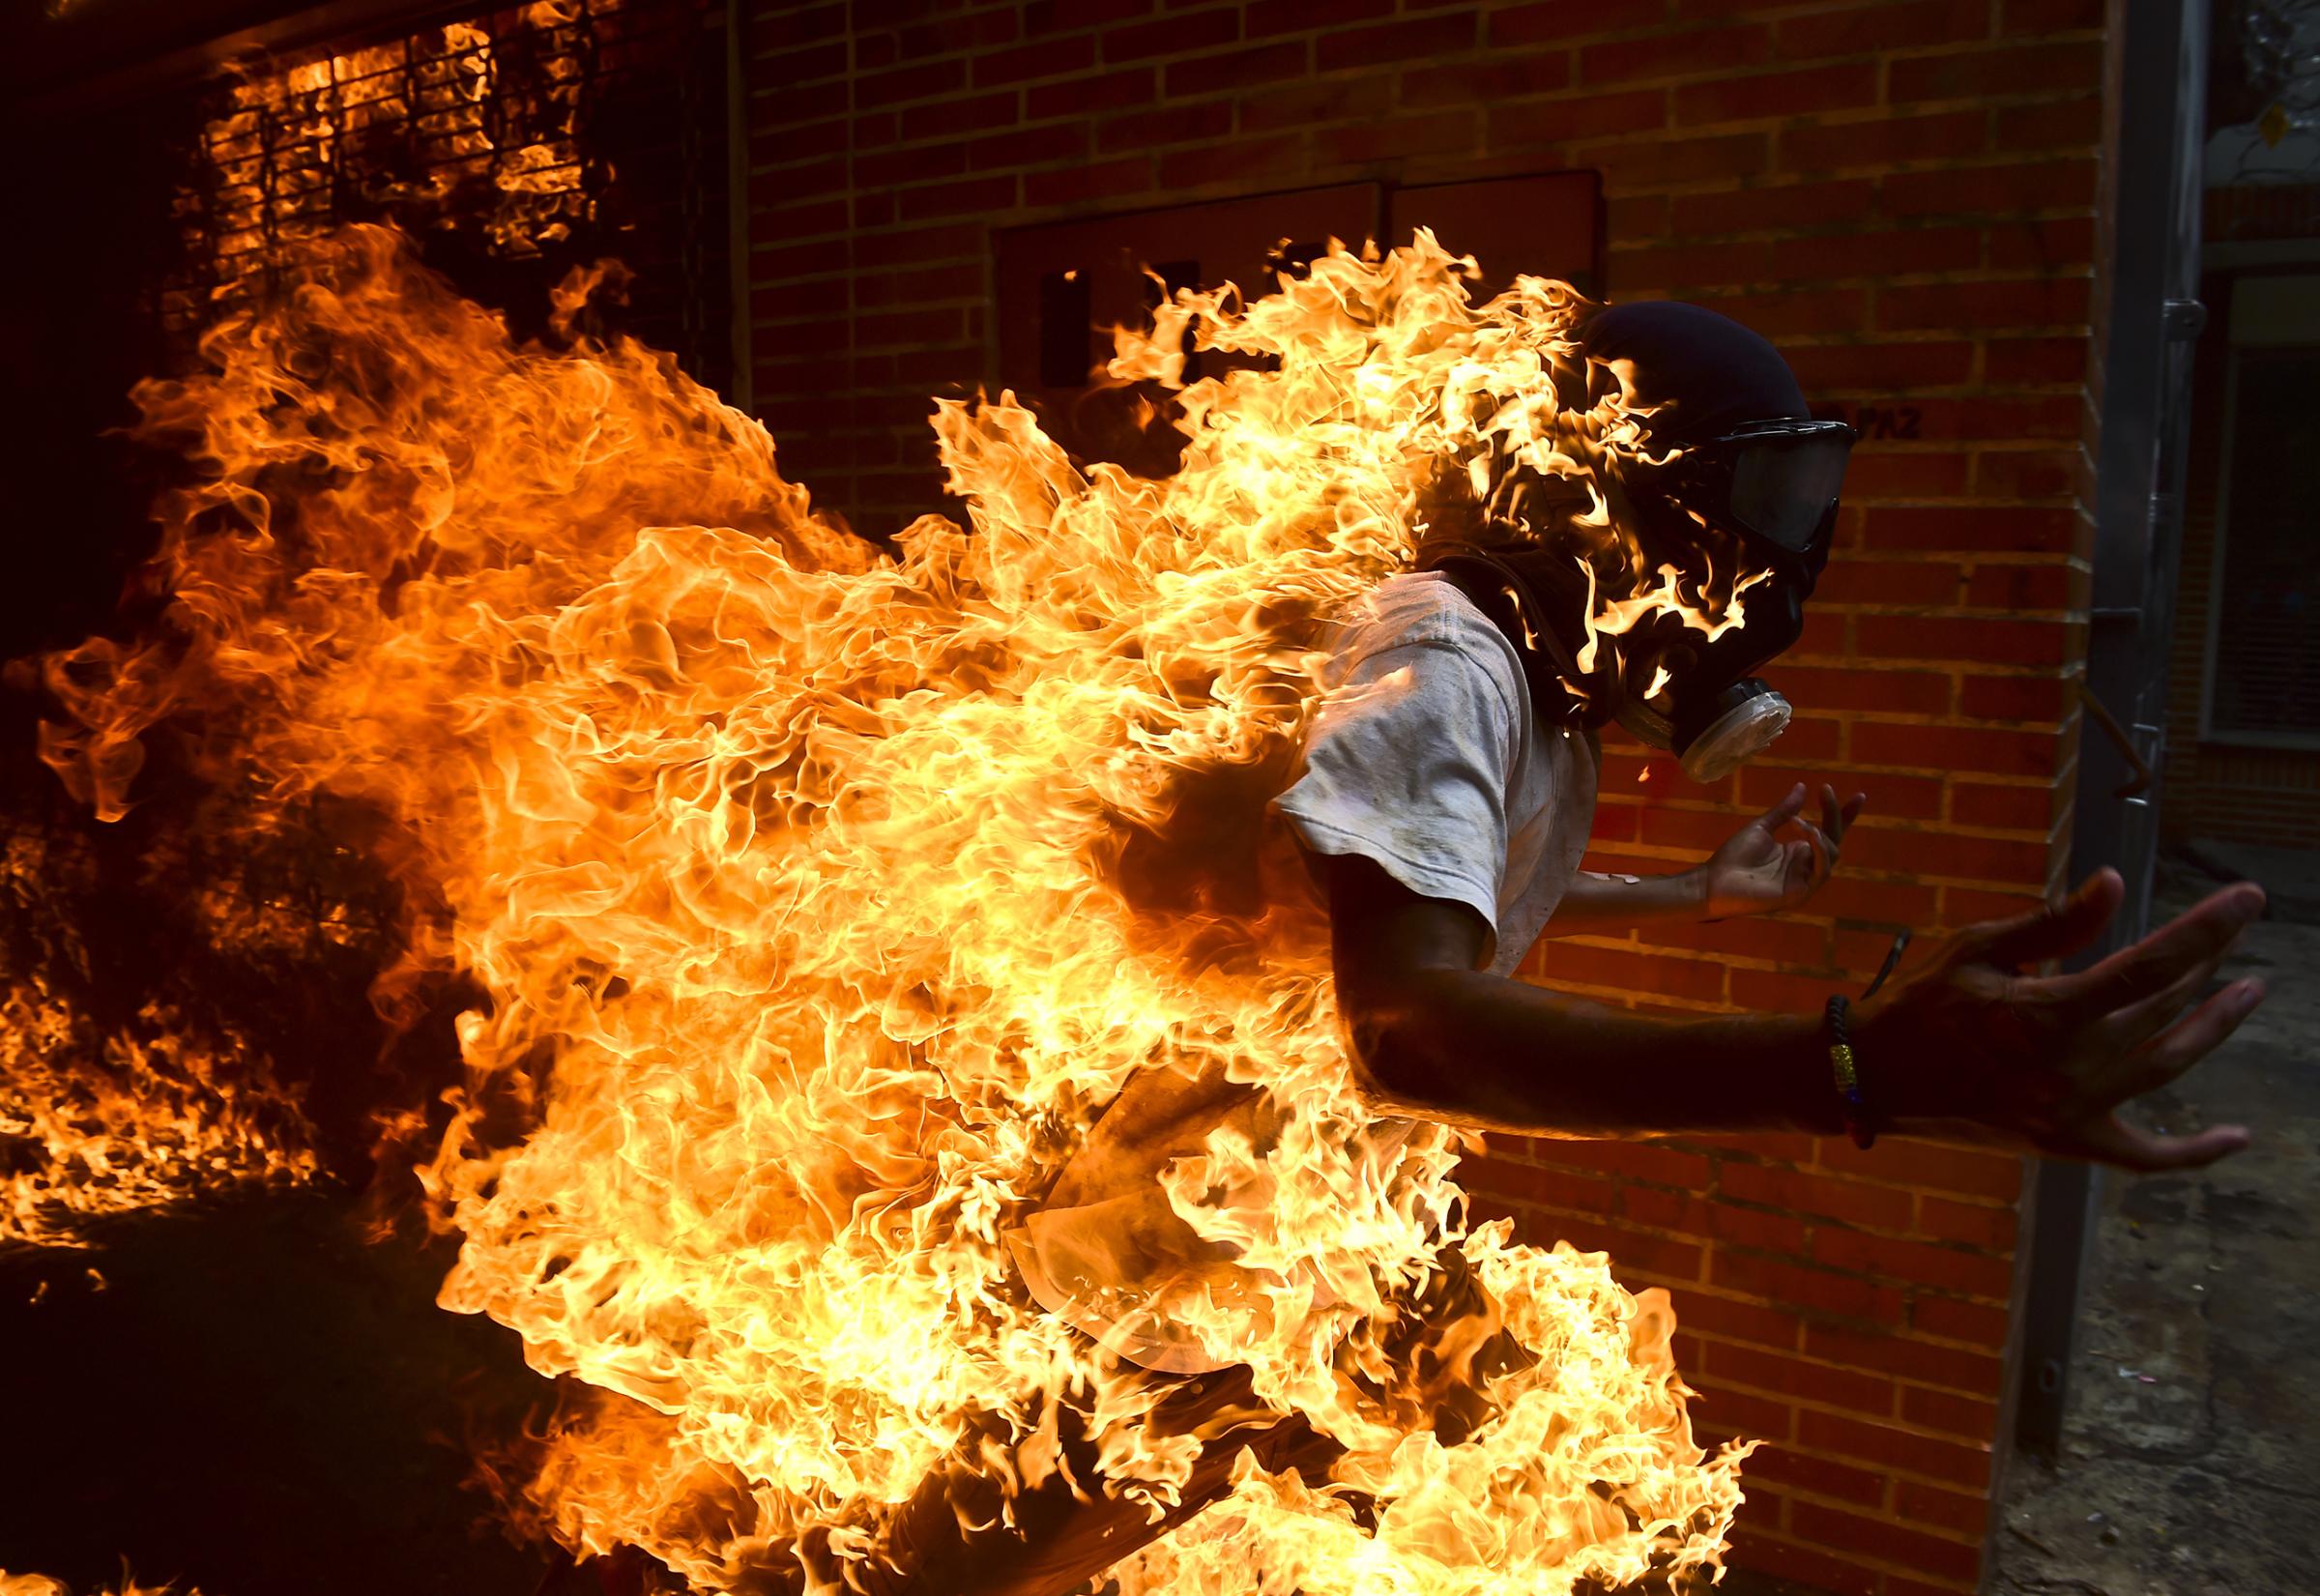 A demonstrator set ablaze runs during an anti-Maduro protest in Caracas on May 3, 2017.